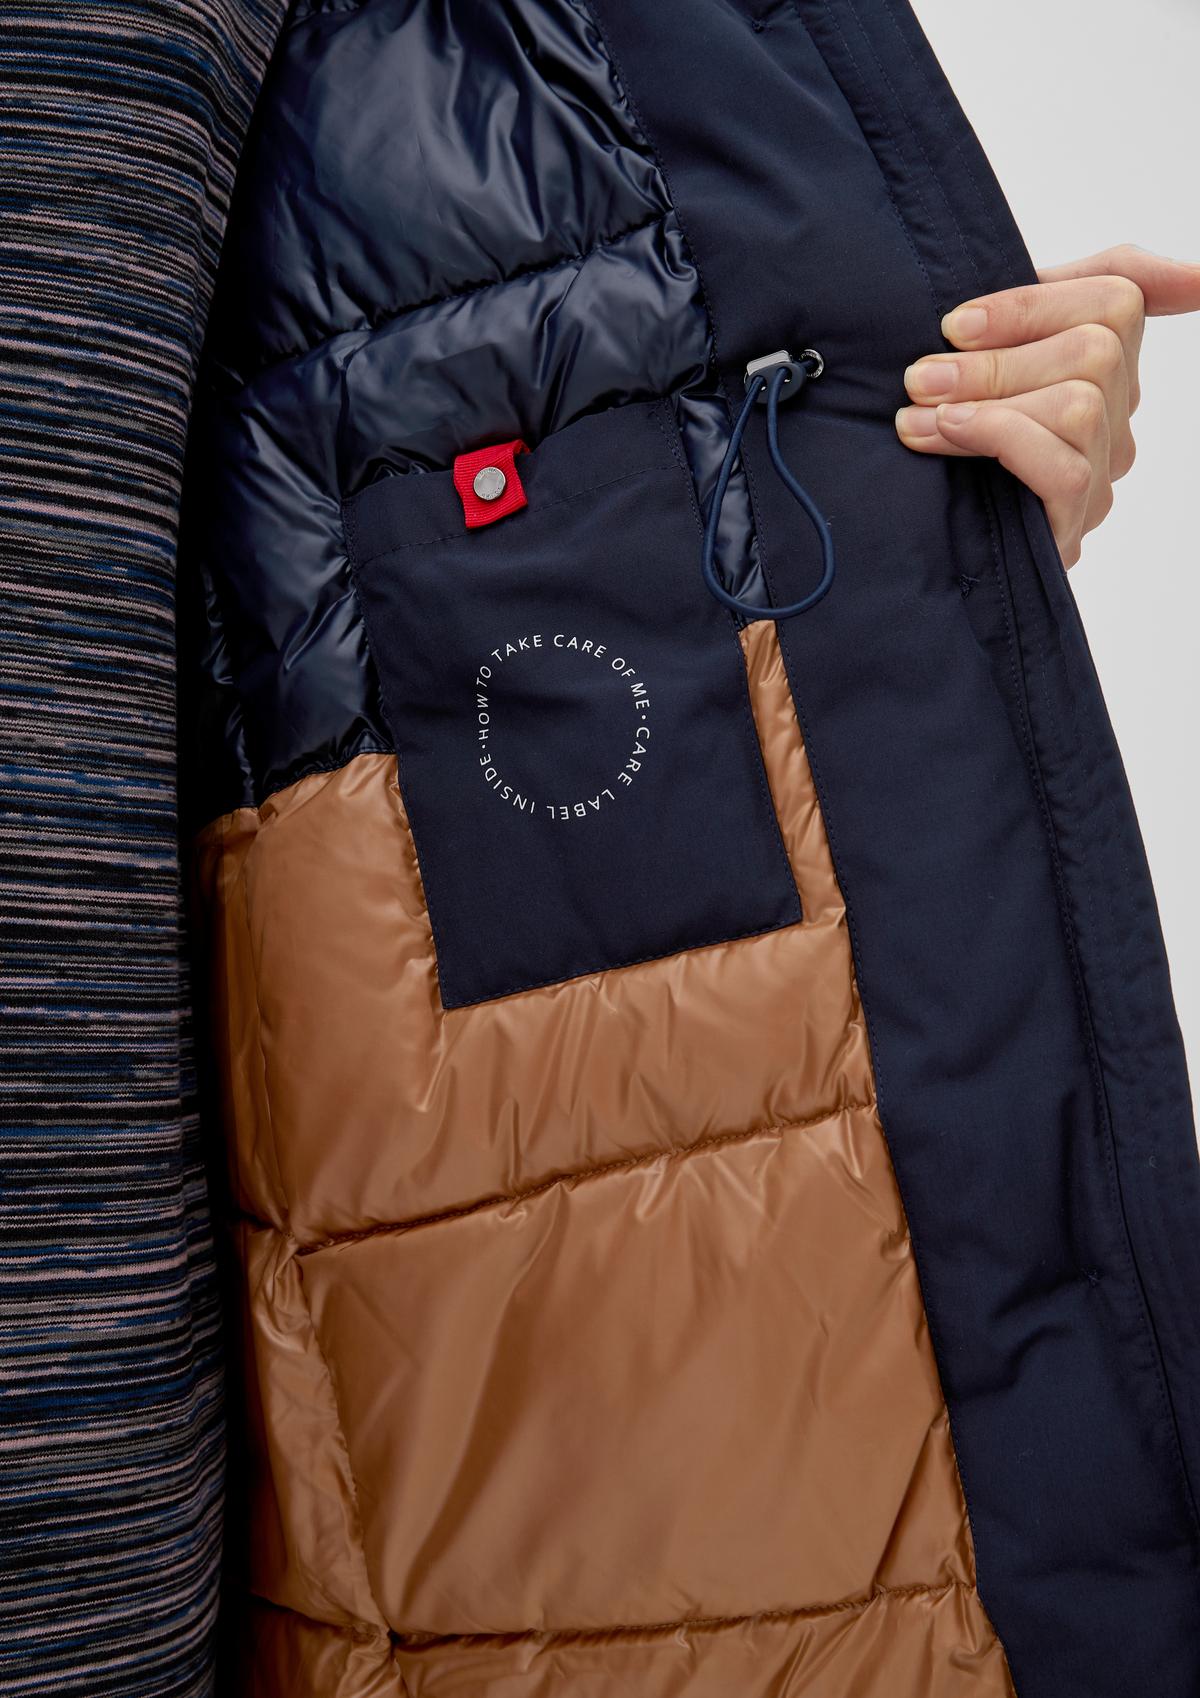 s.Oliver Parka with padding